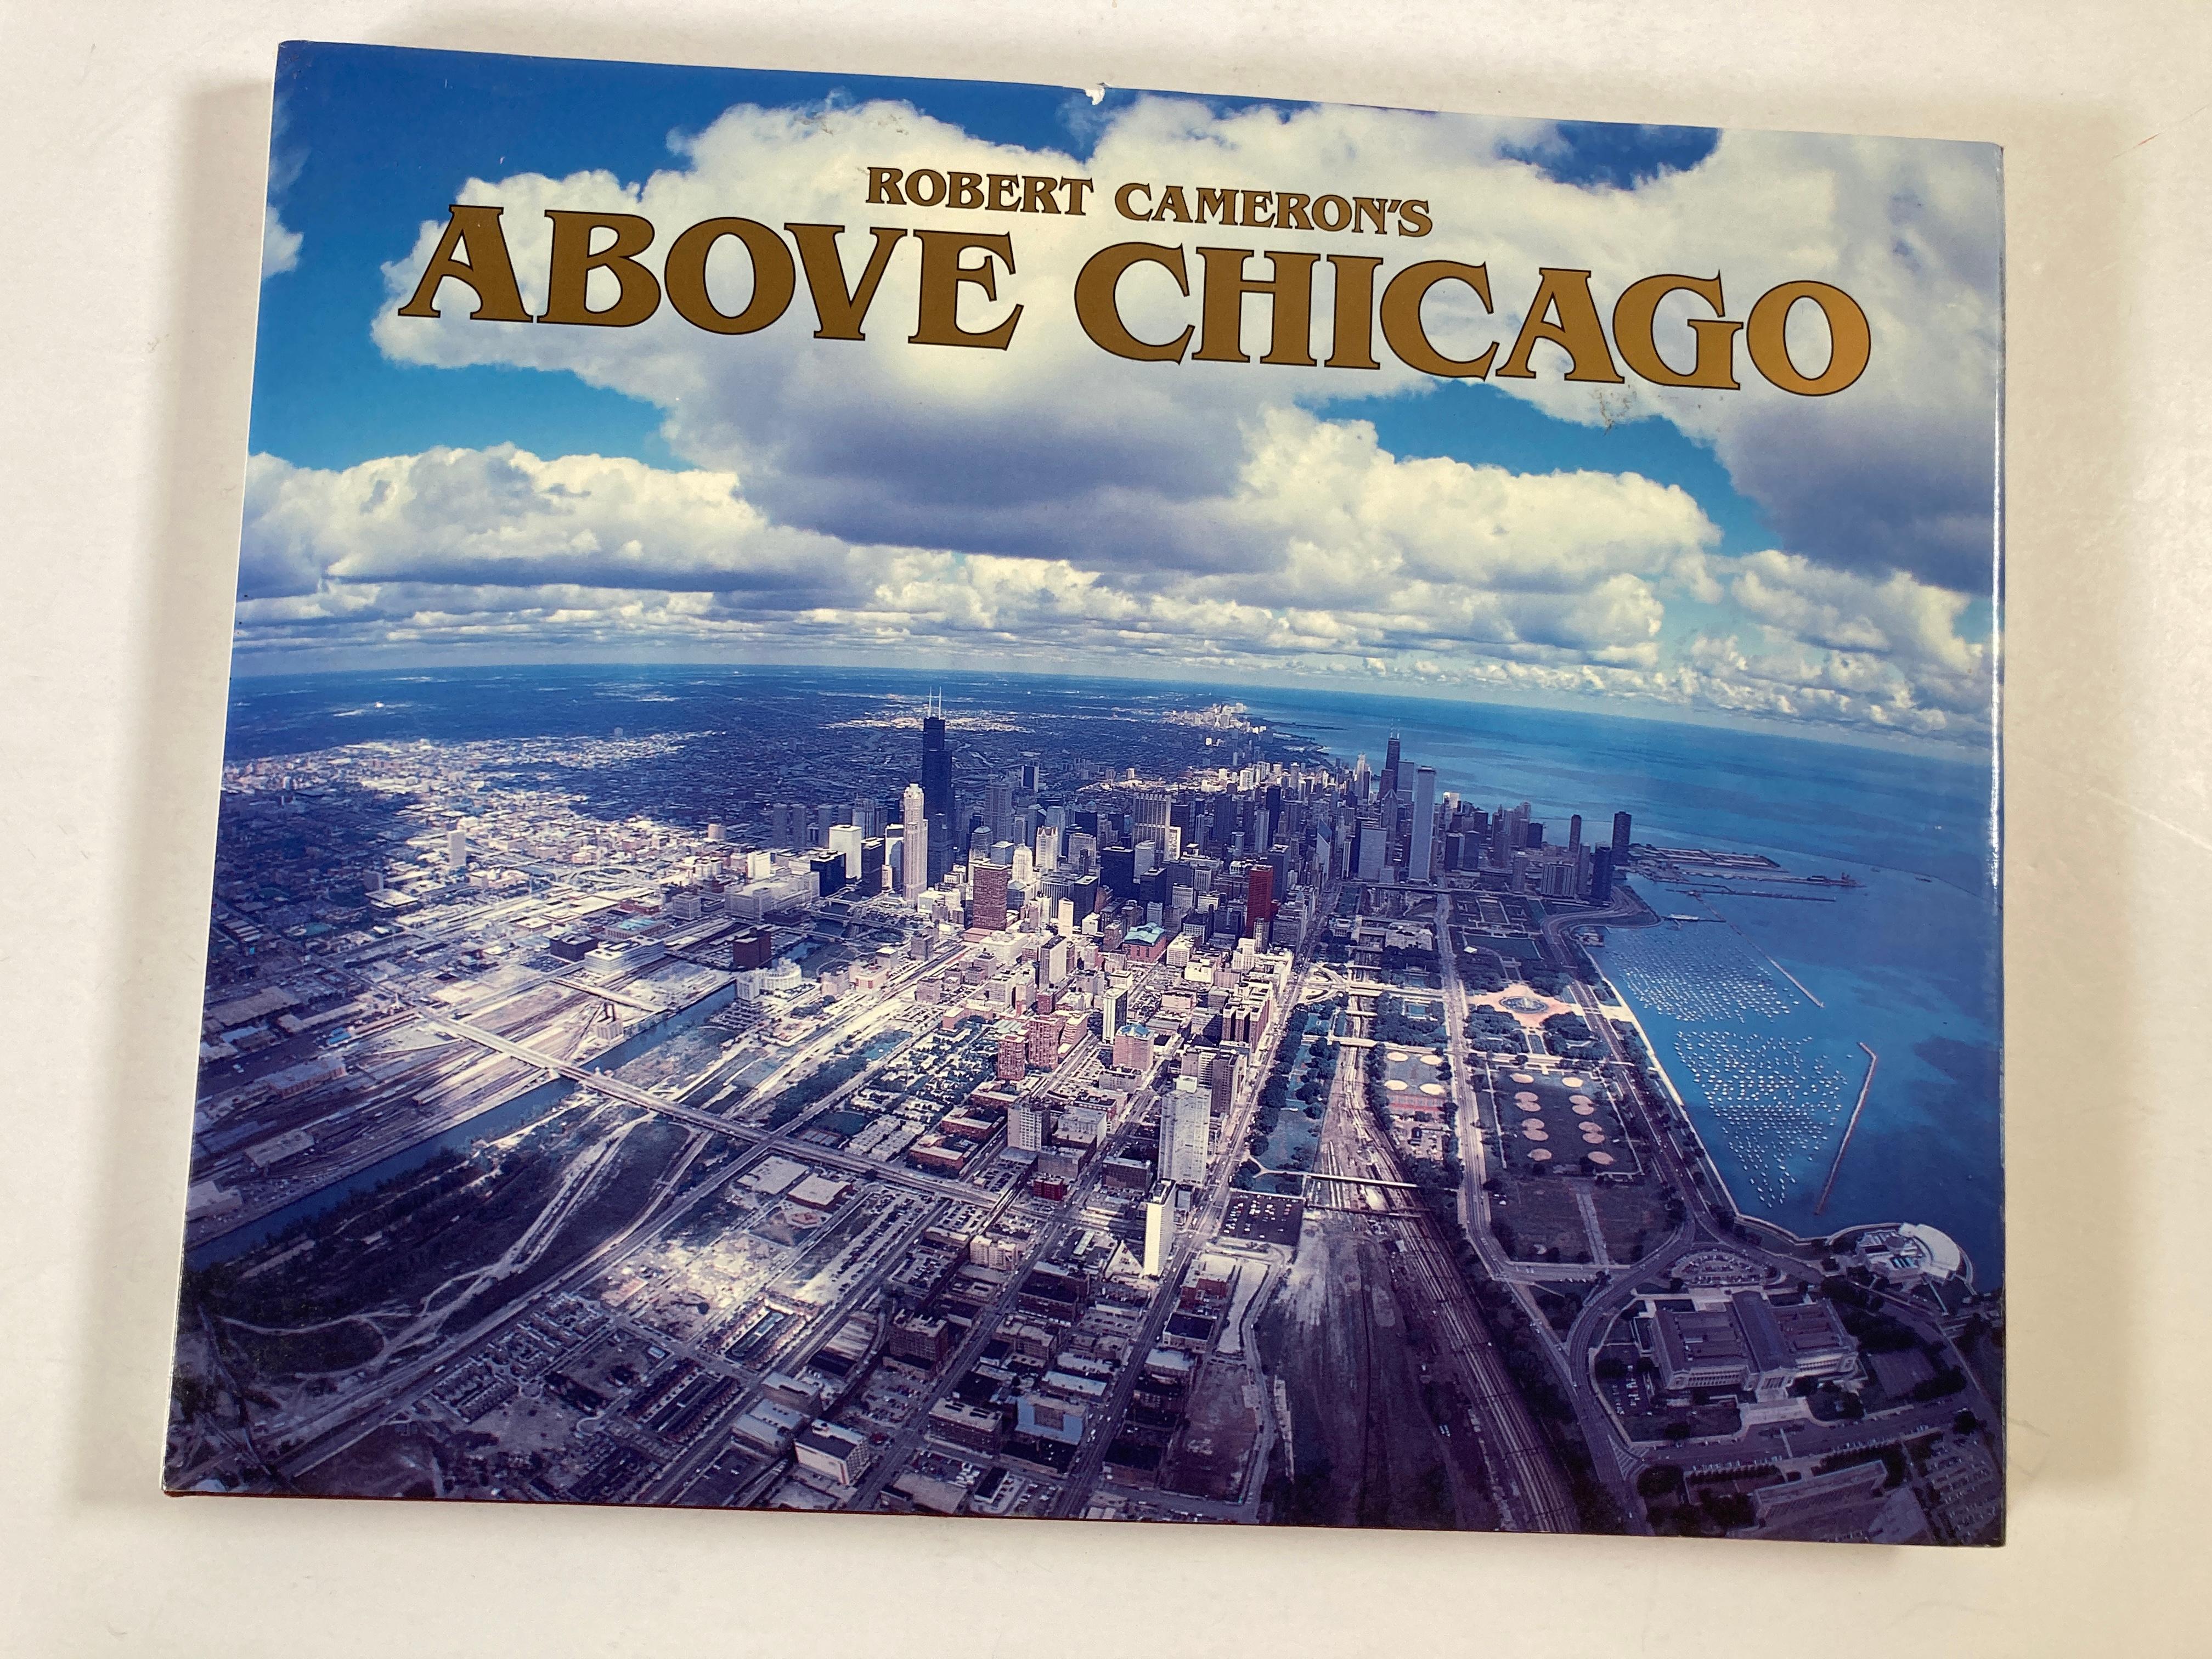 Above Chicago book by Robert Cameron Hardcover Book.
Robert Cameron, Tim Samuelson, Cheryl Kent
Cameron, 1992 - Photography - 159 pages
The newest Above volume tells the story of Chicago from the Loop to the Stockyards, from its incomparable golf